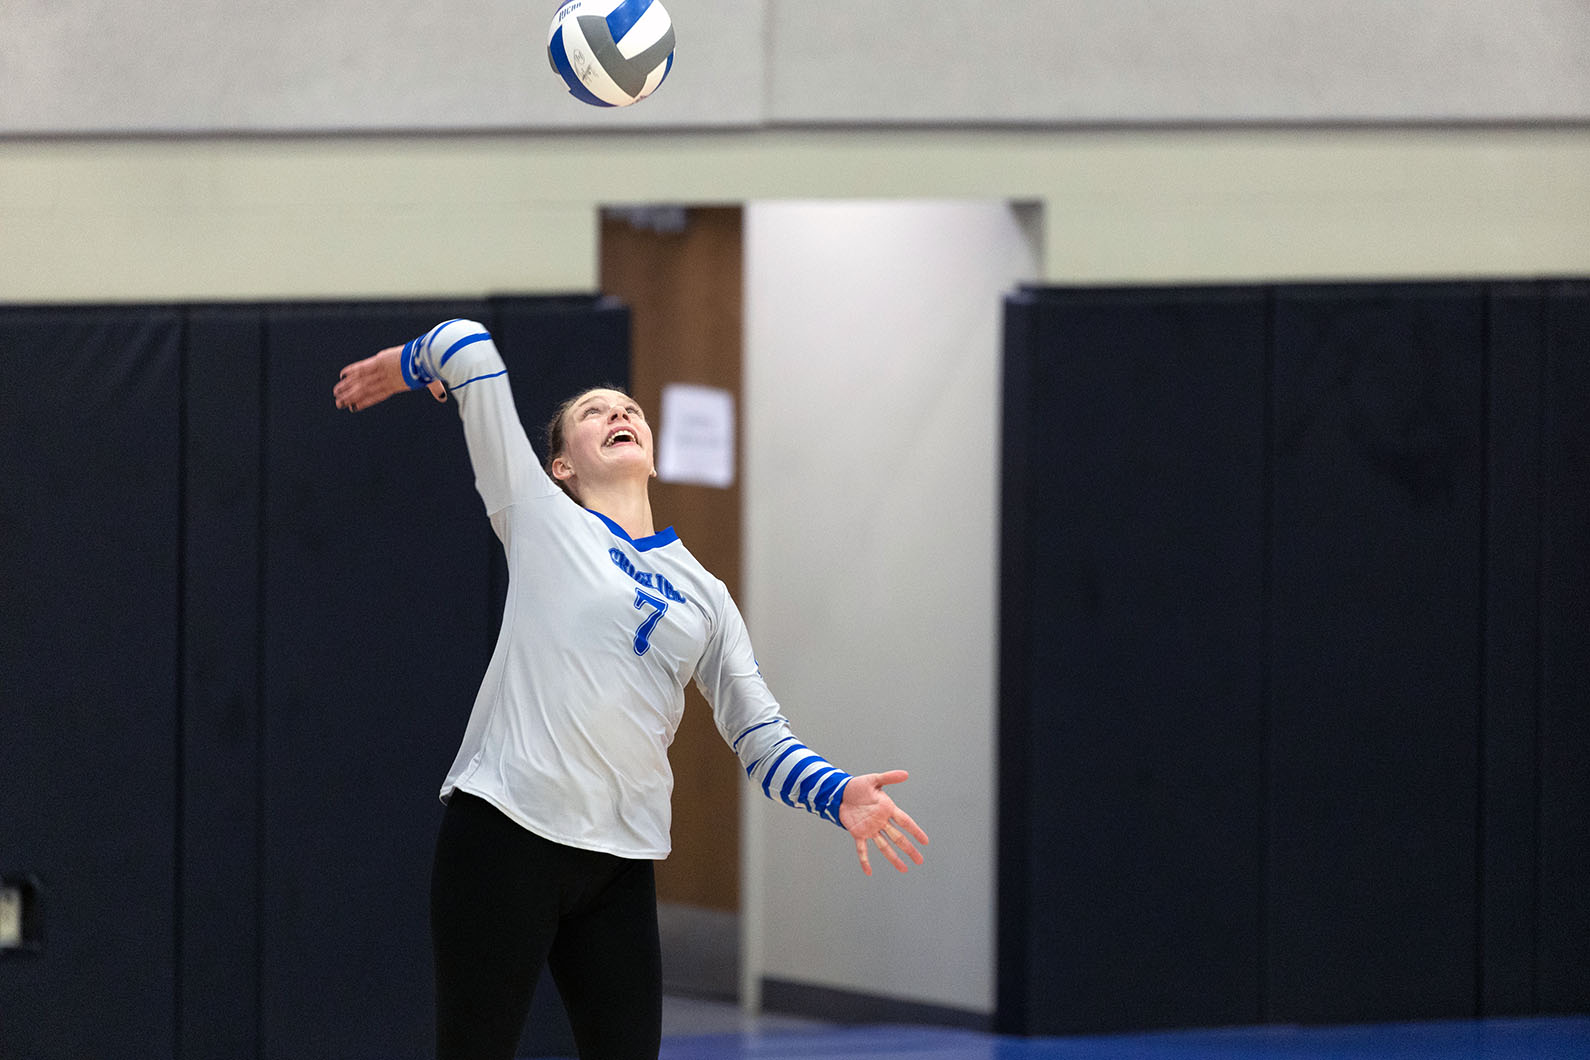 Iolanda Tercariol recorded a team leading seven aces during the Mineral Area College Tournament Oct. 13-14. Above she serves at a recent home game. (MSU-WP Photo)